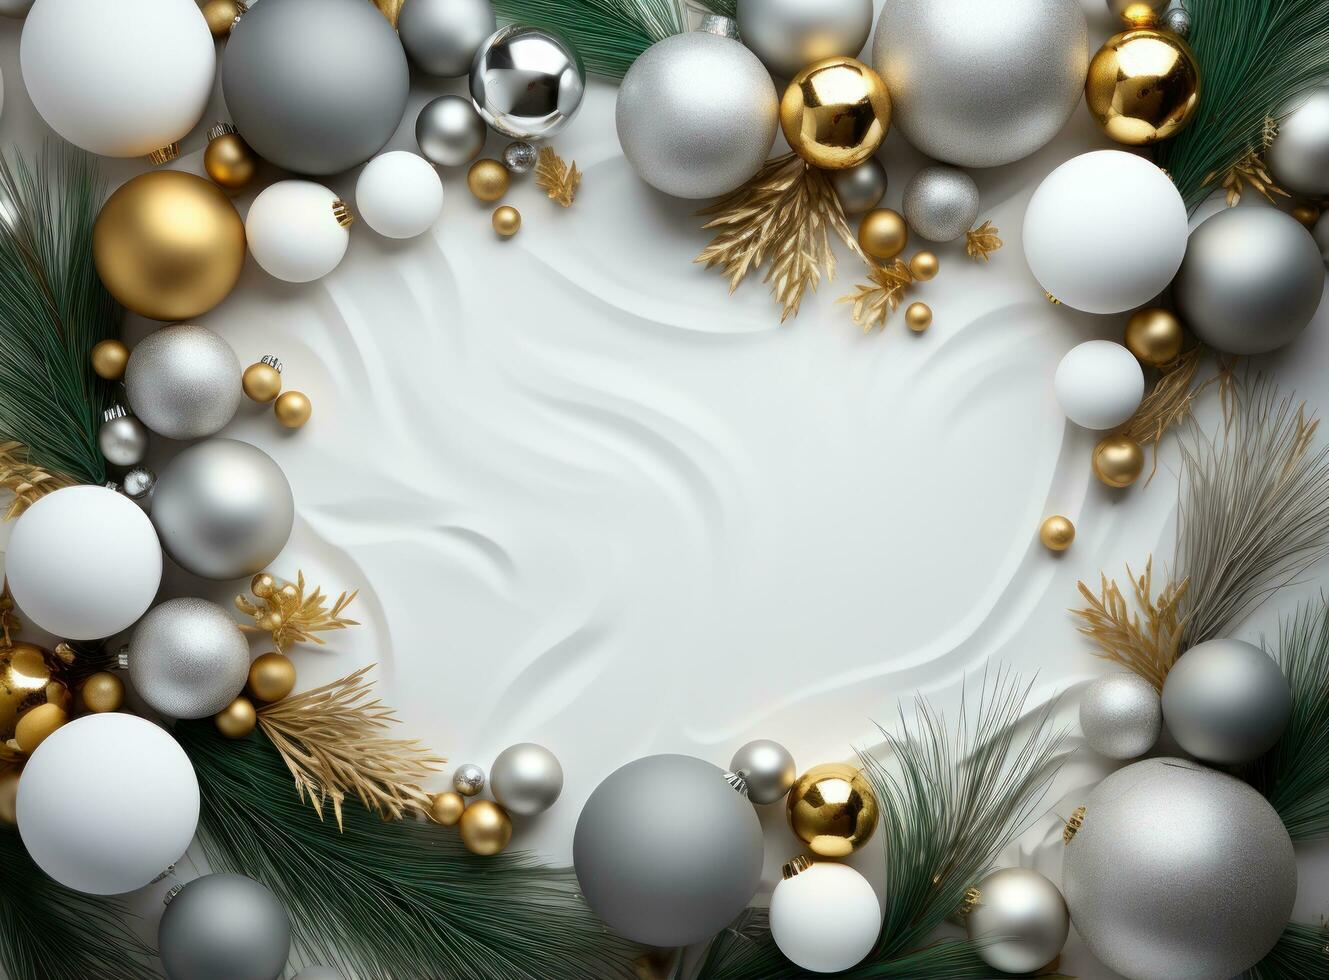 Abstract Christmas frame background photo